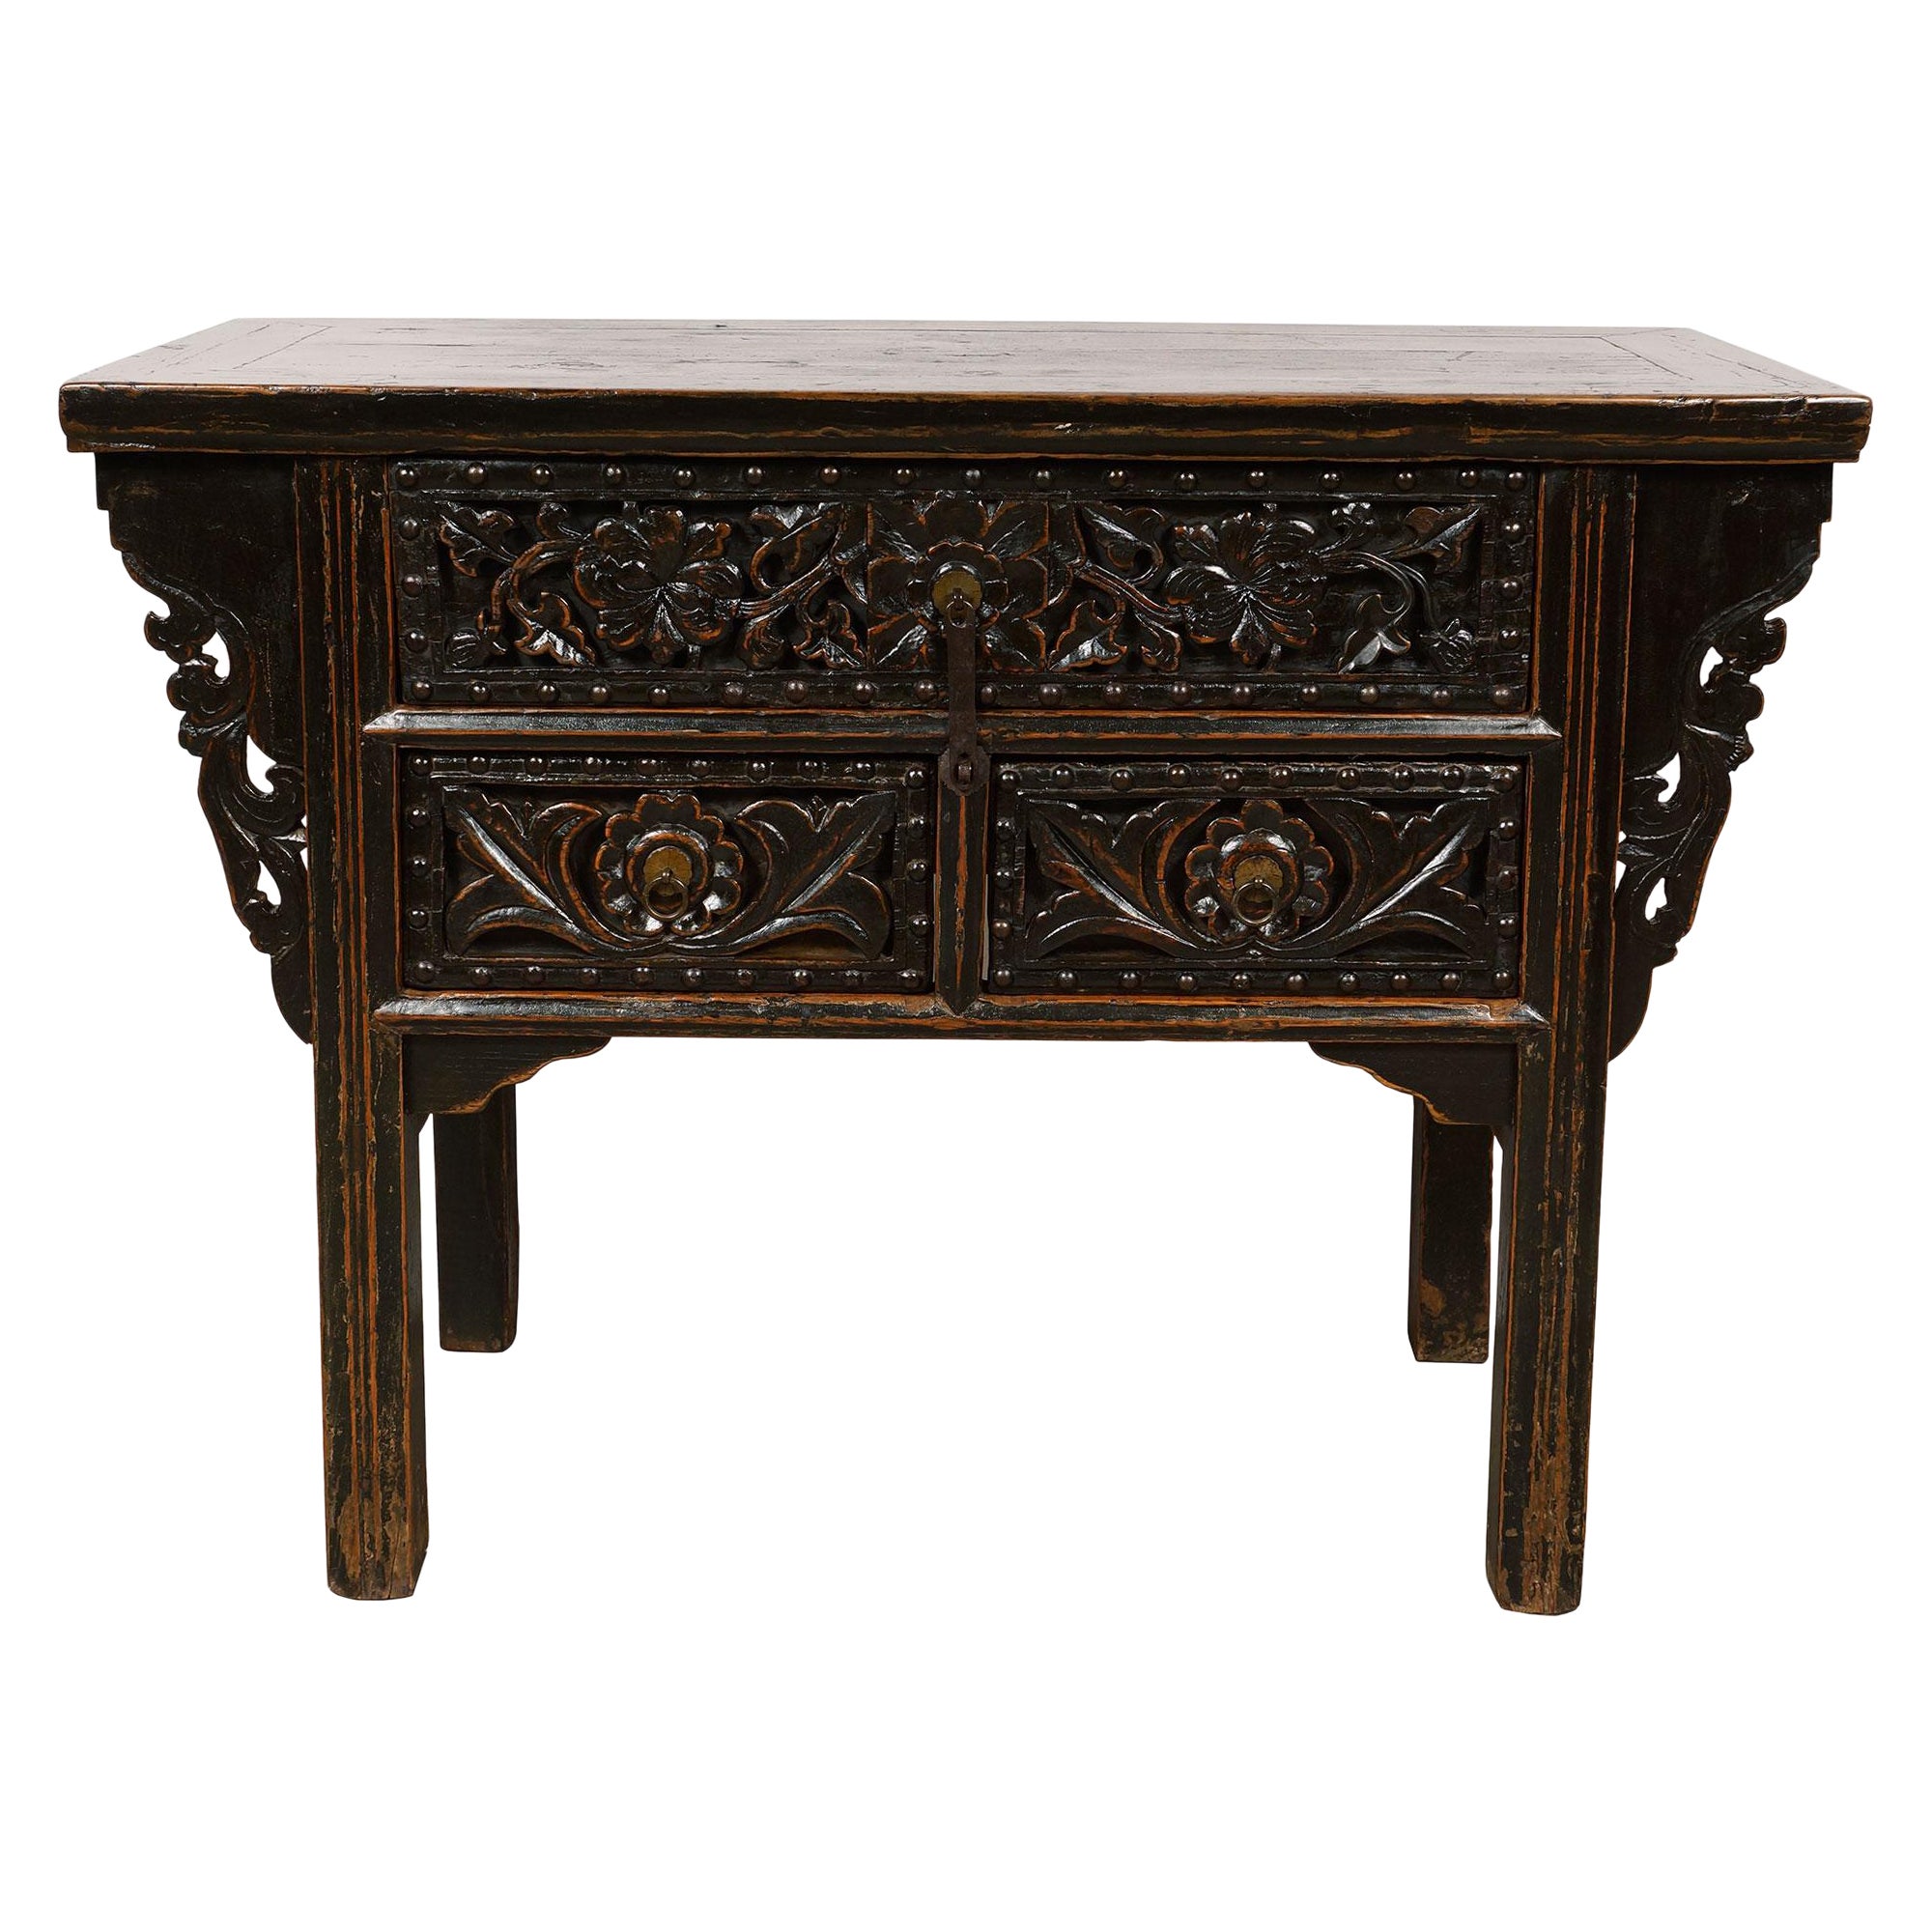 19th Century Antique Chinese Carved Shan xi Console Table/Sideboard